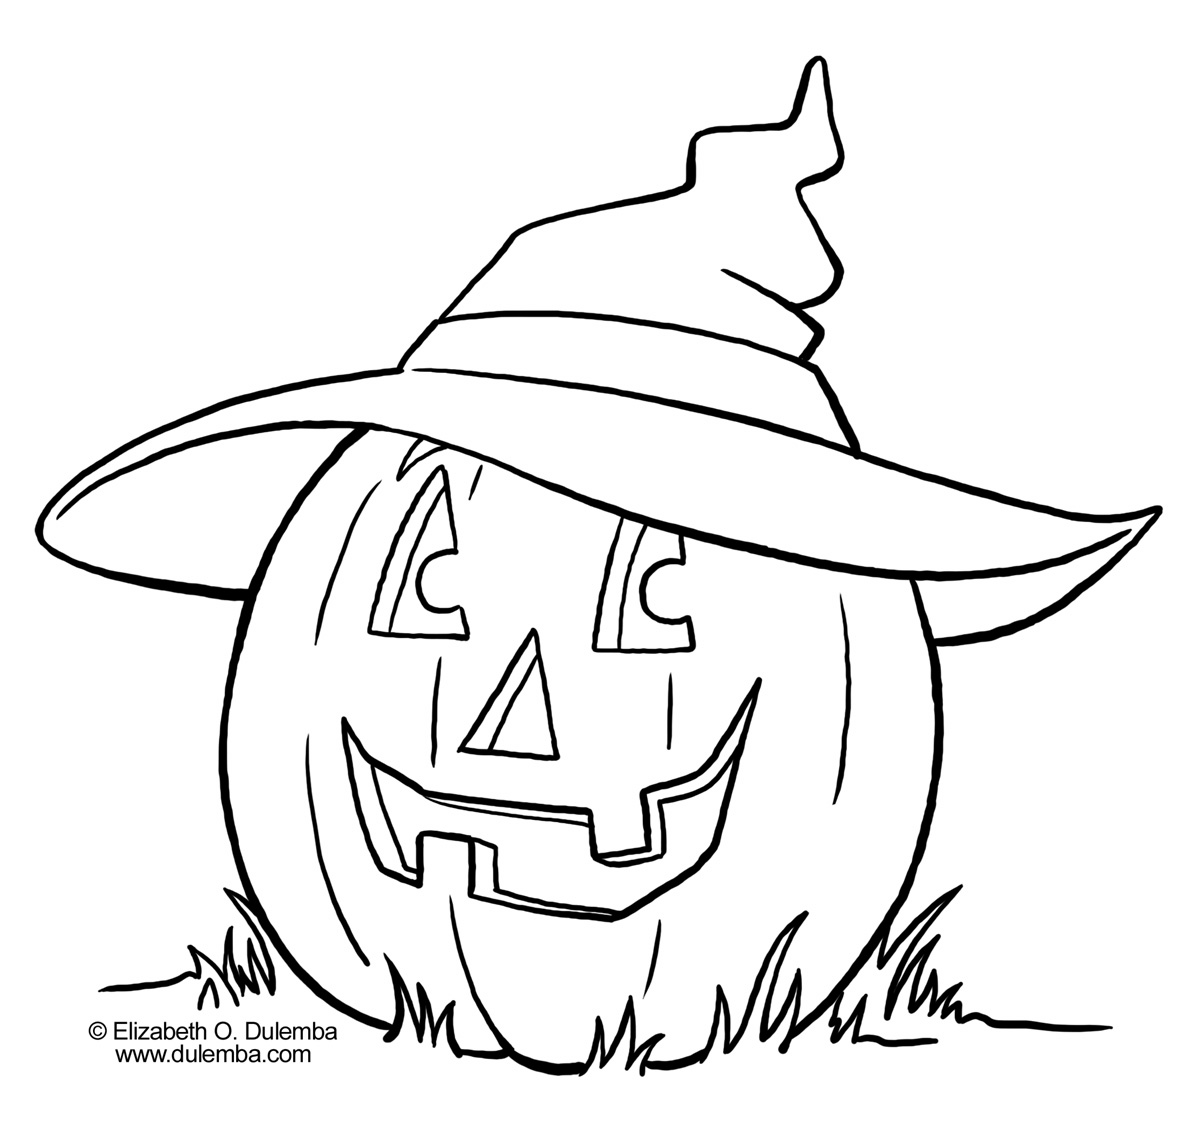  Good Pumpkin Halloween Coloring Pages